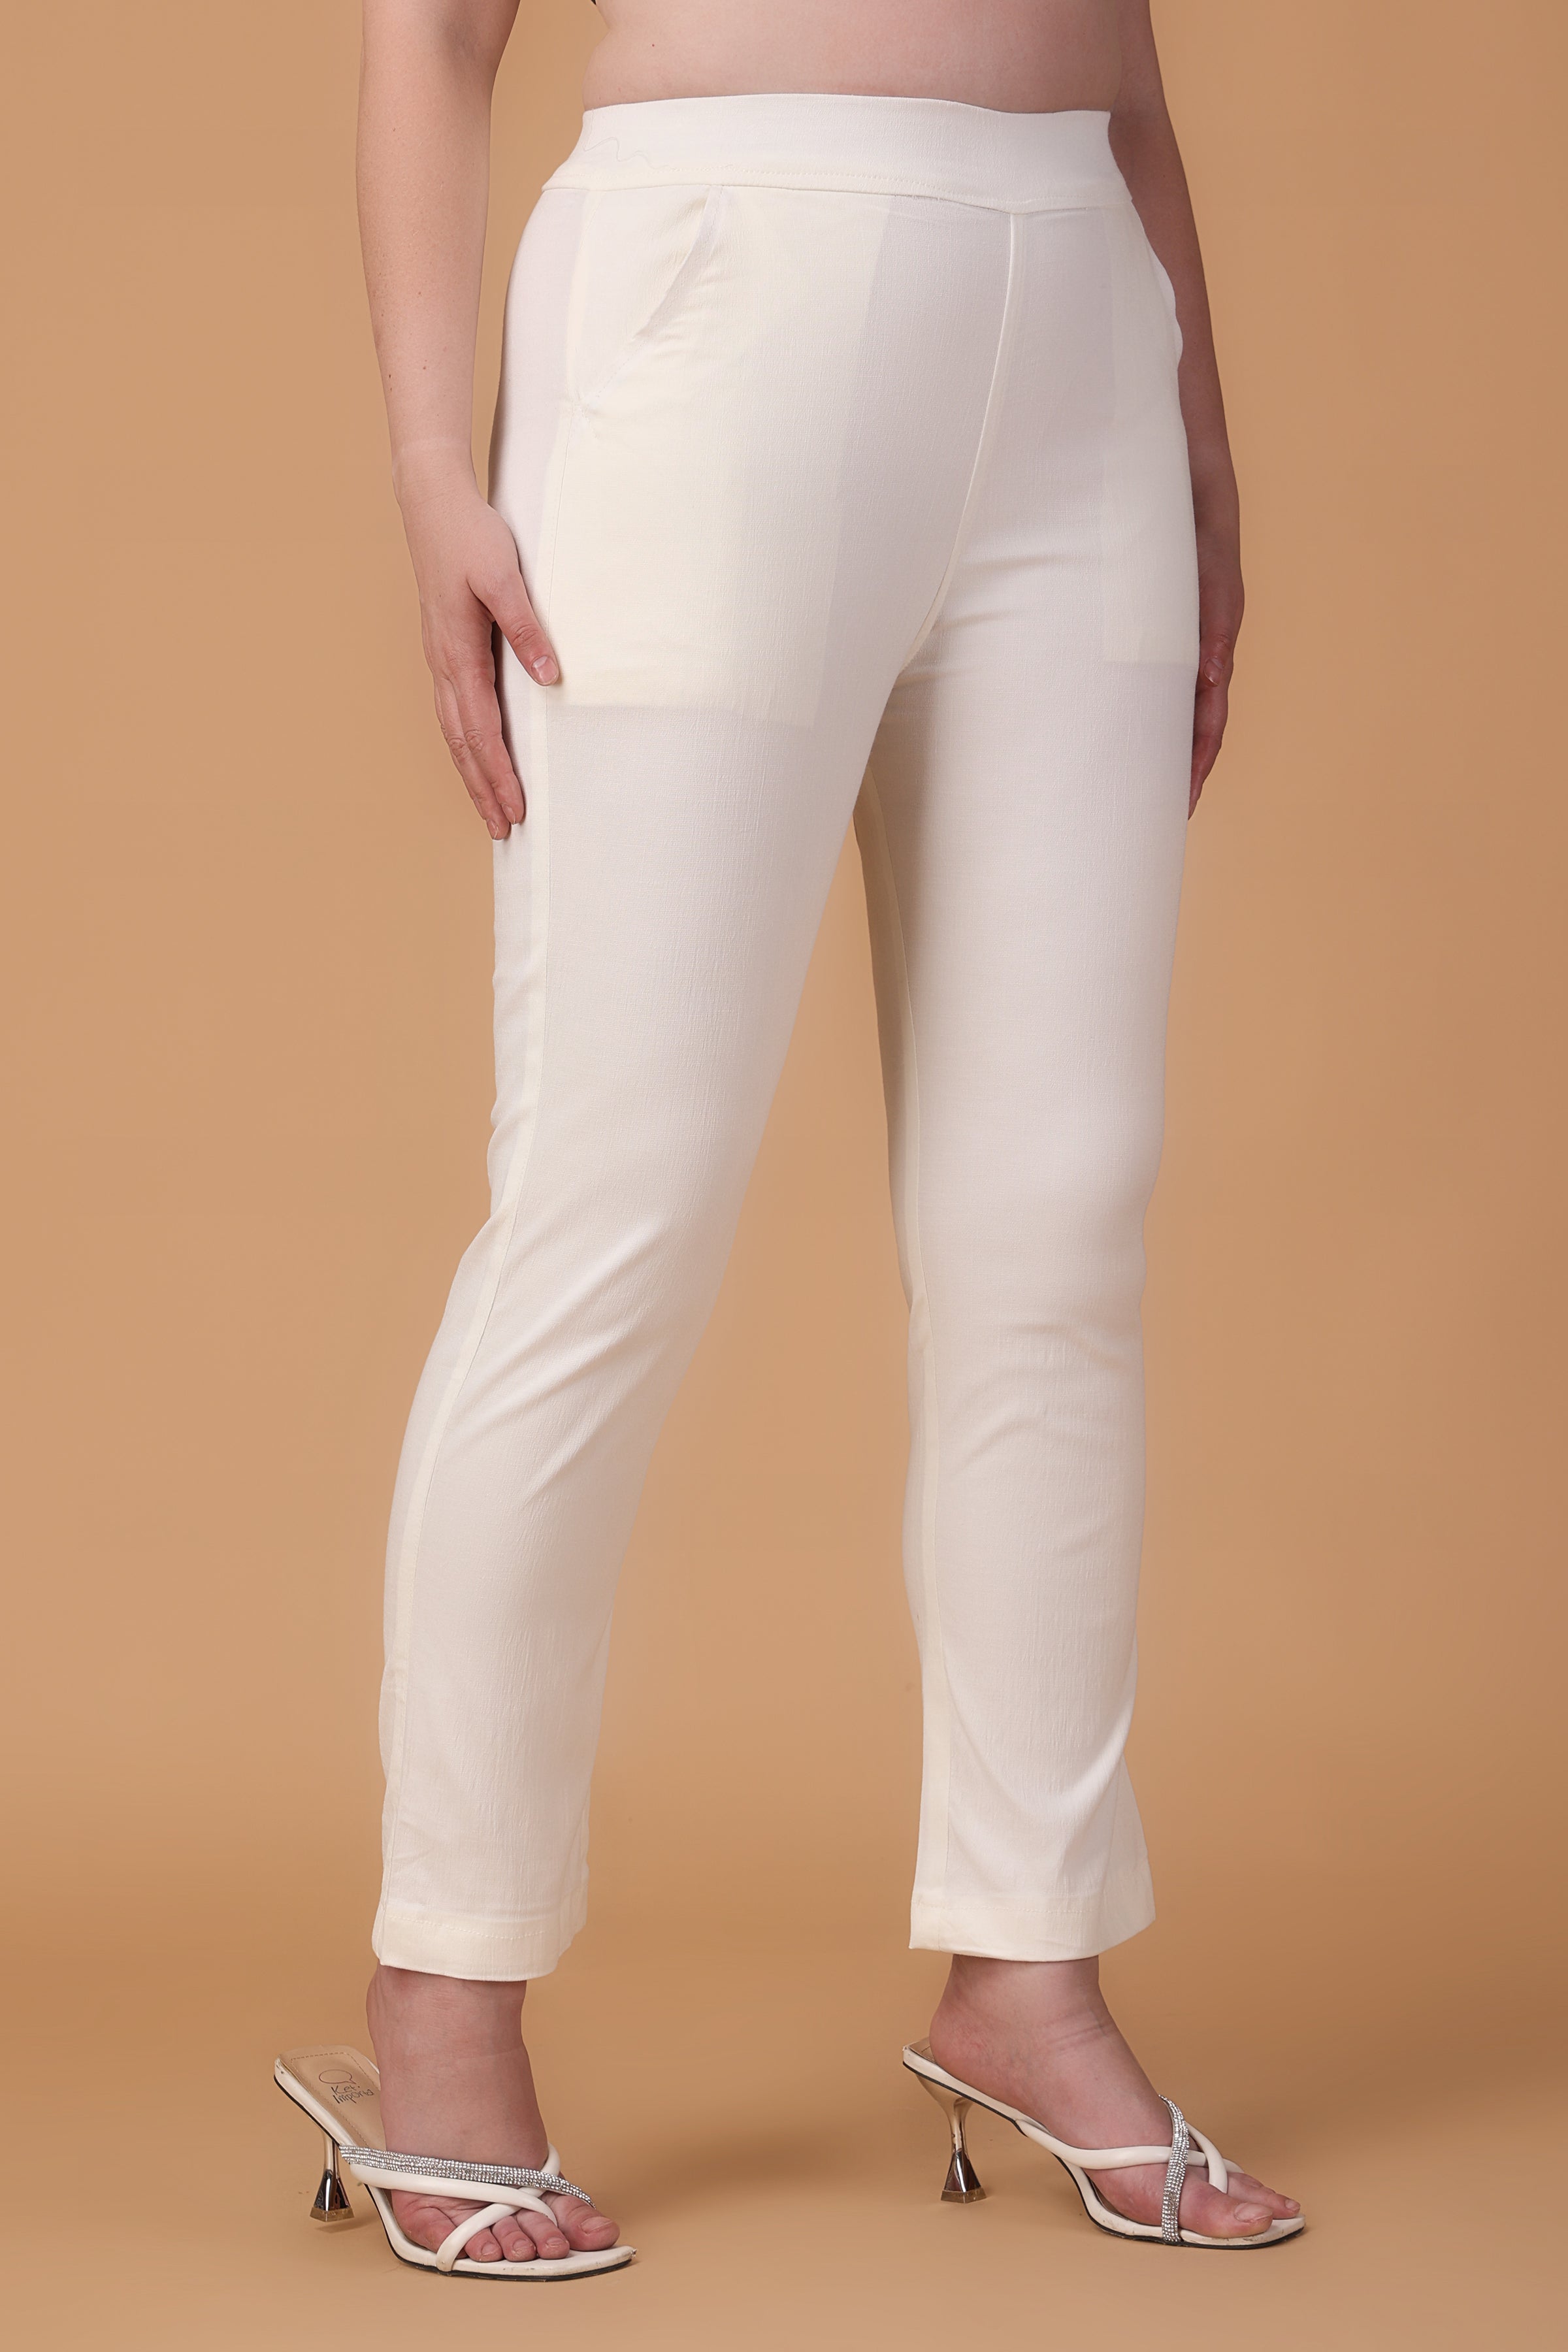 Buy Womens Regular Fit Cotton Lycra Pant Online In India At Discounted  Prices